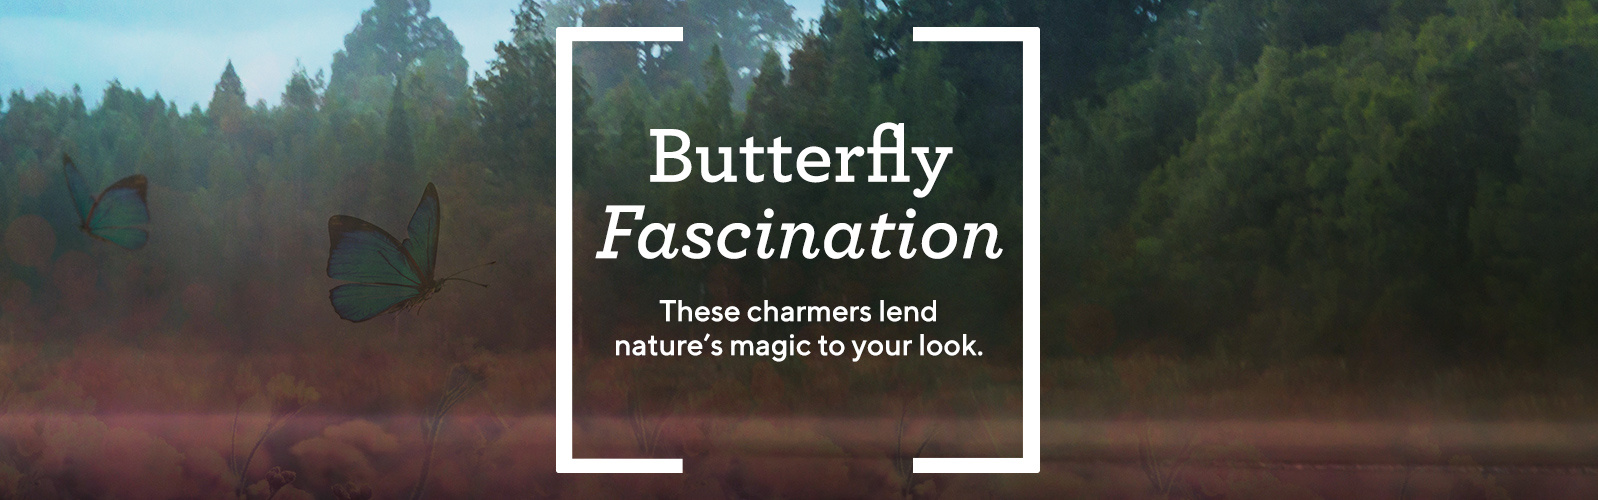 Butterfly Fascination   These charmers lend nature's magic to your look. 